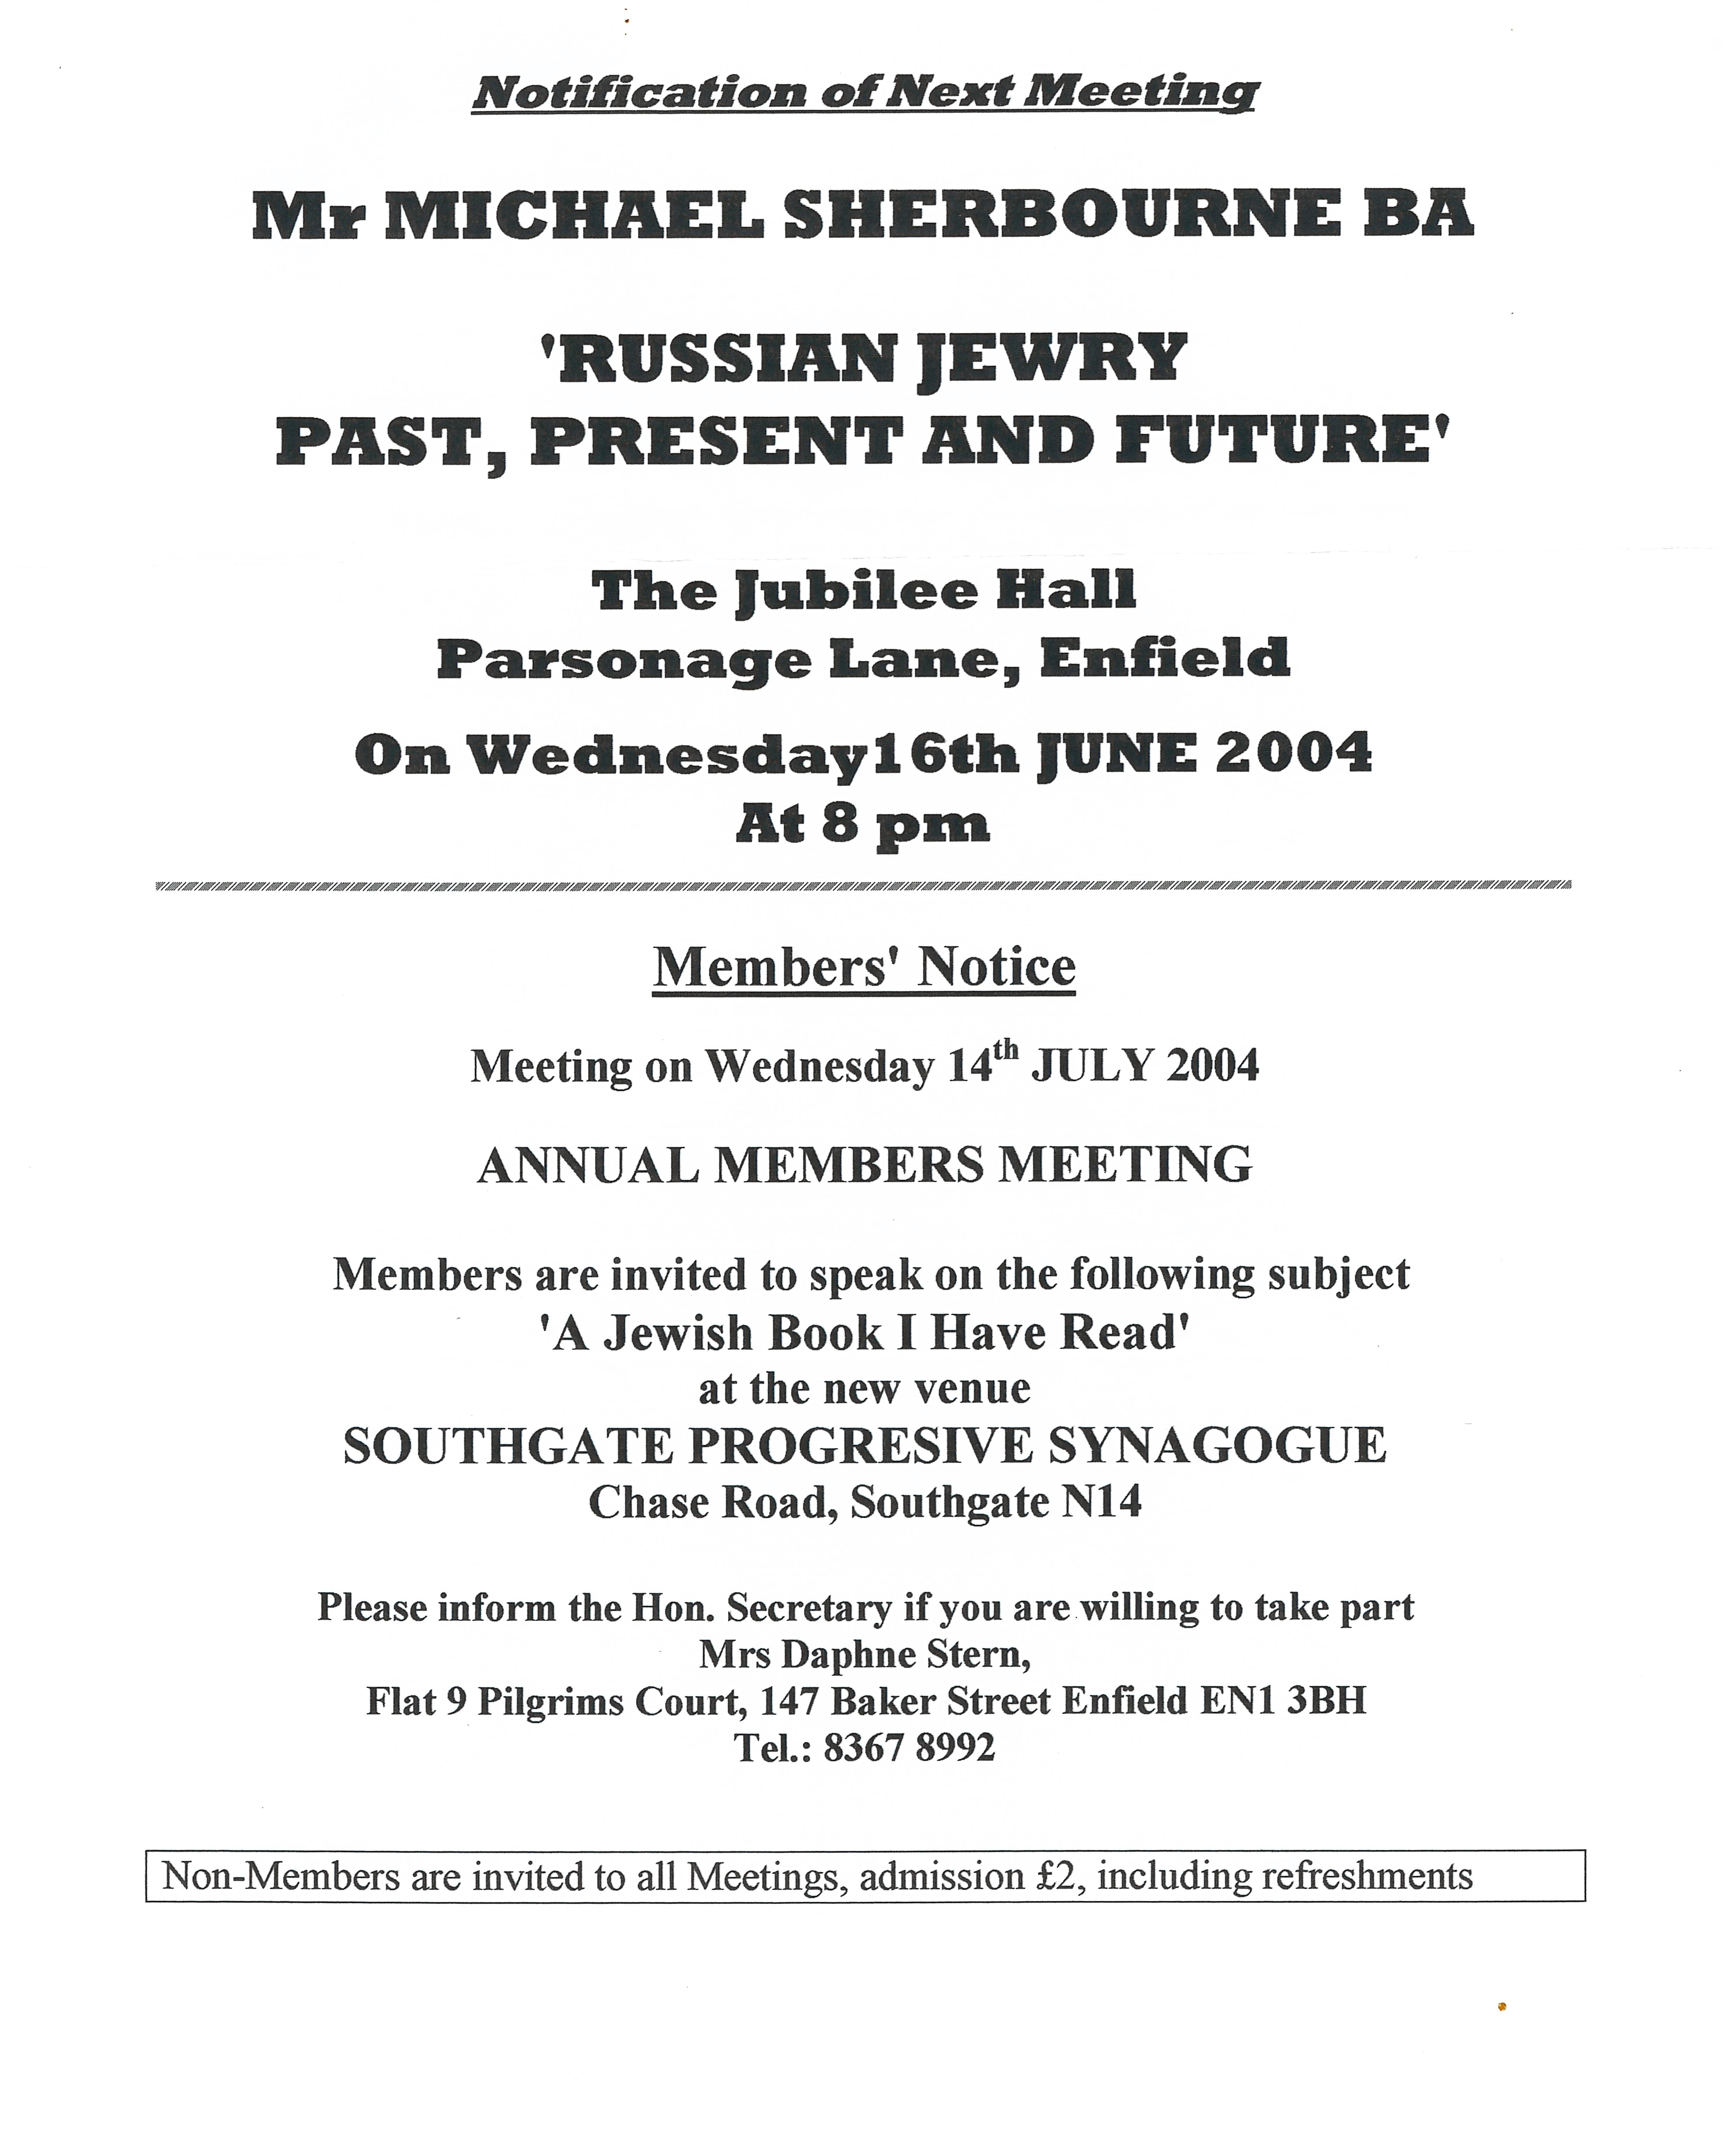 Poster for talk given by Michael Sherbourne on ‘Russian Jewry Past, Present, and Future’, 2004 [MS 434 A 4249 1/3 Folder 8]